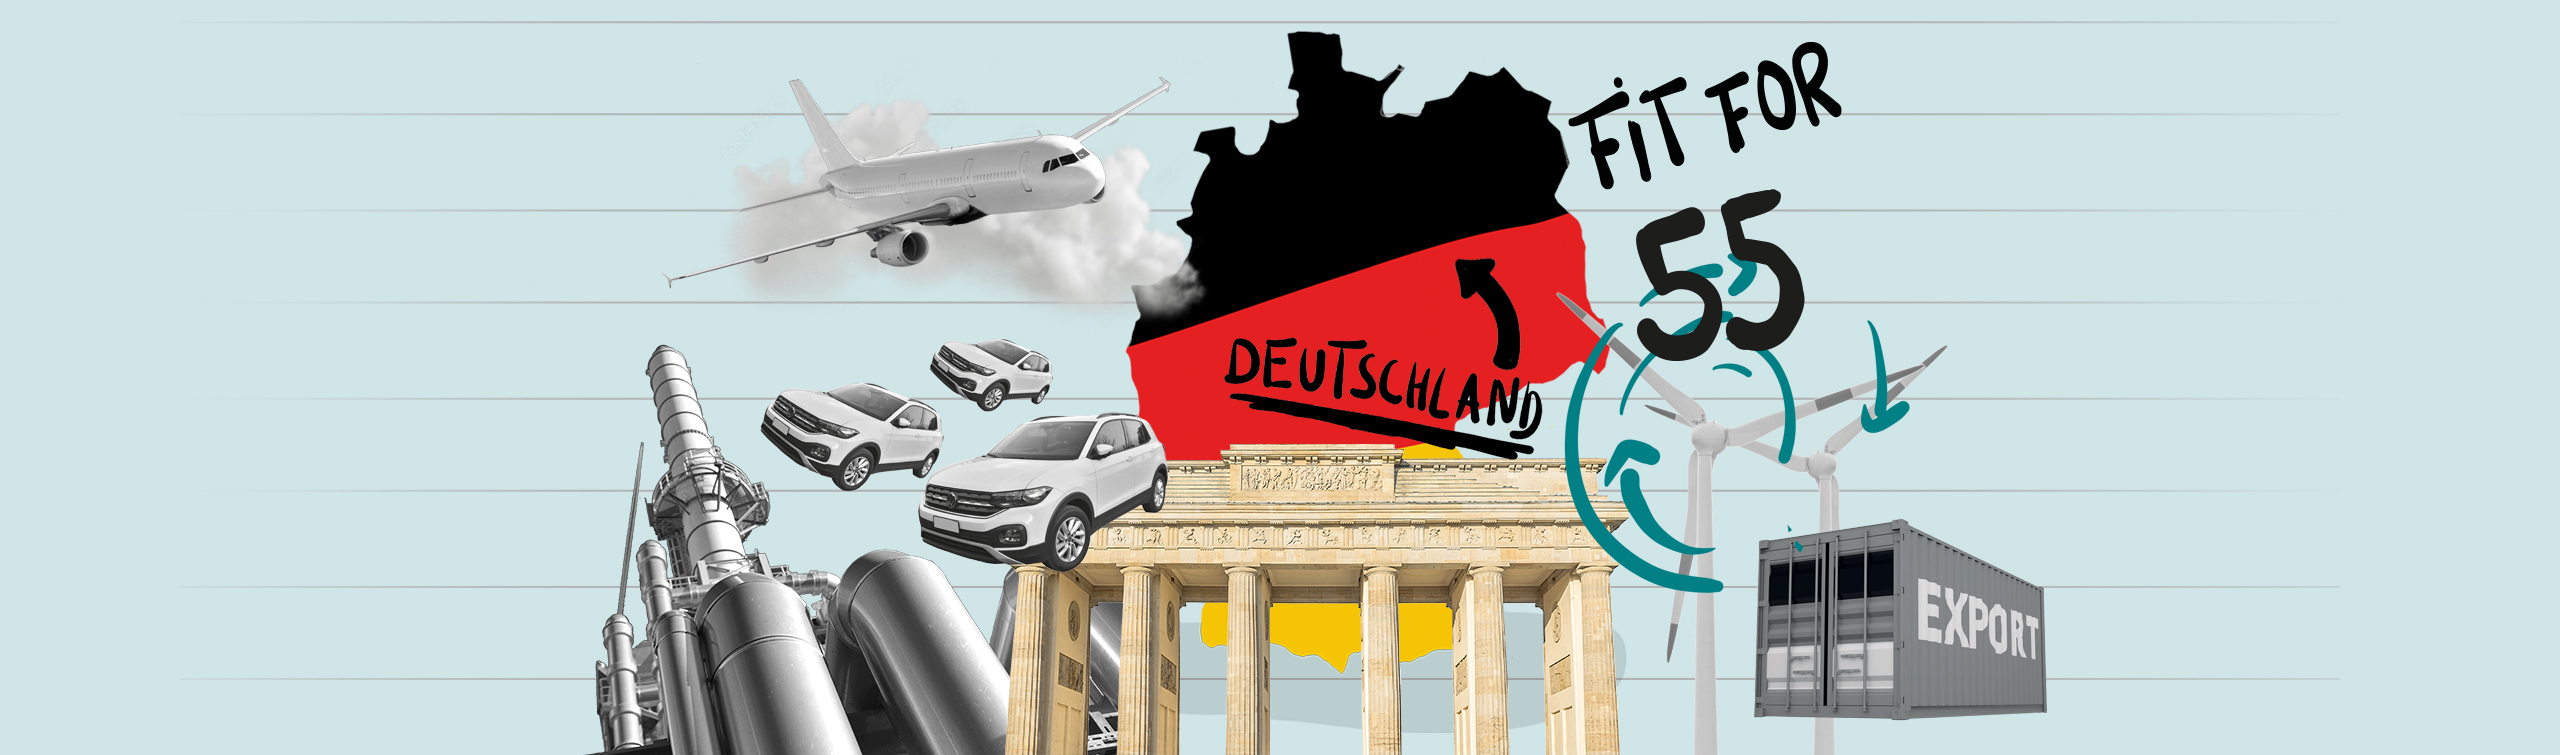 Despite the war and pandemic: Is Germany’s economy ”Fit for 55“?